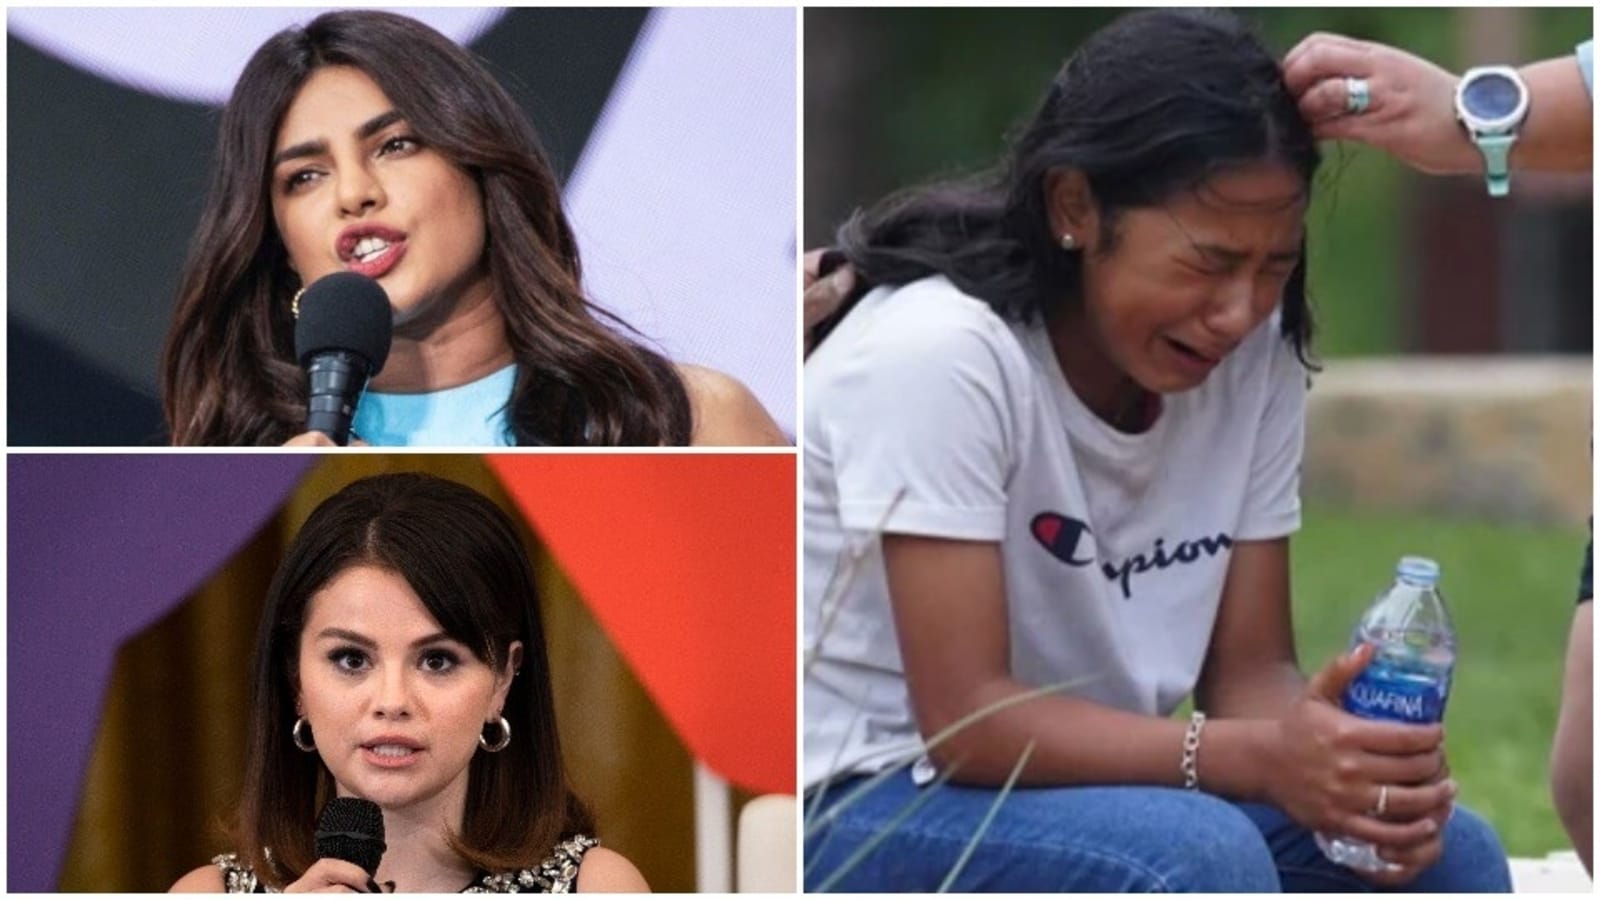 Texas shooting: Priyanka Chopra says condolences aren't enough, Selena Gomez frustrated at the horror in her home state